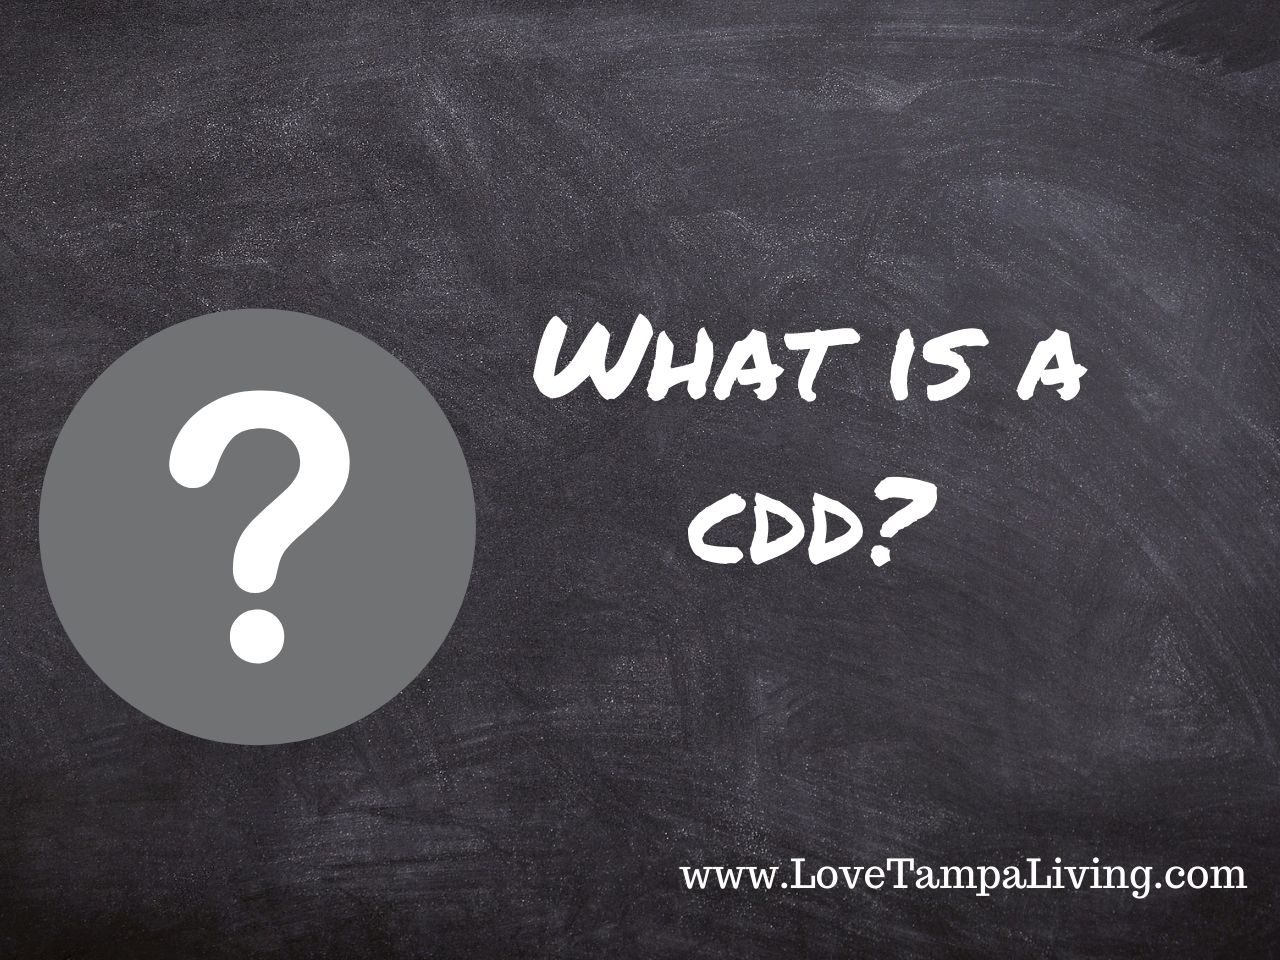 What is a CDD?